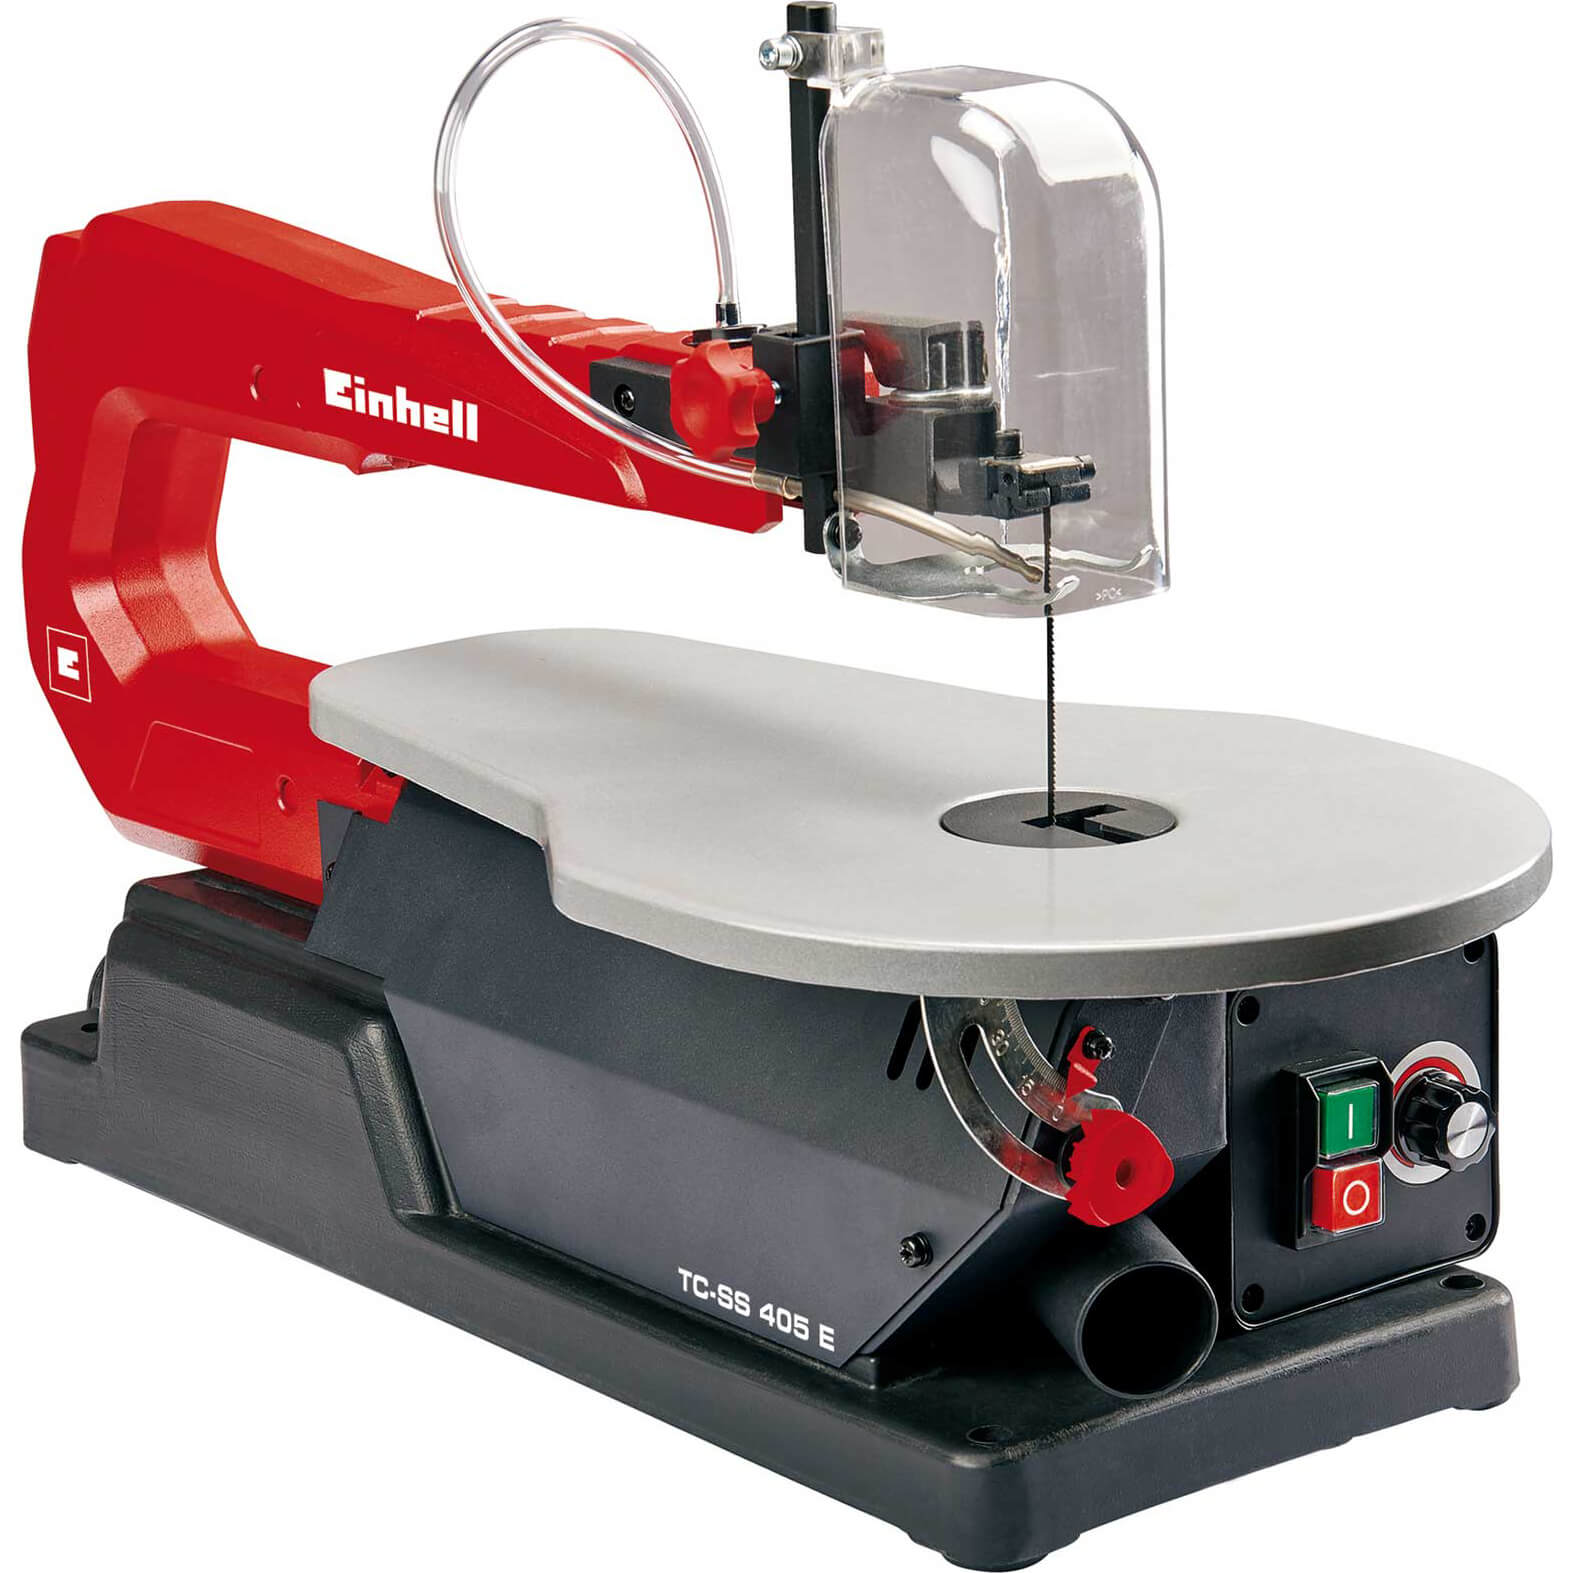 Image of Einhell TC-SS 405 E Scroll Saw